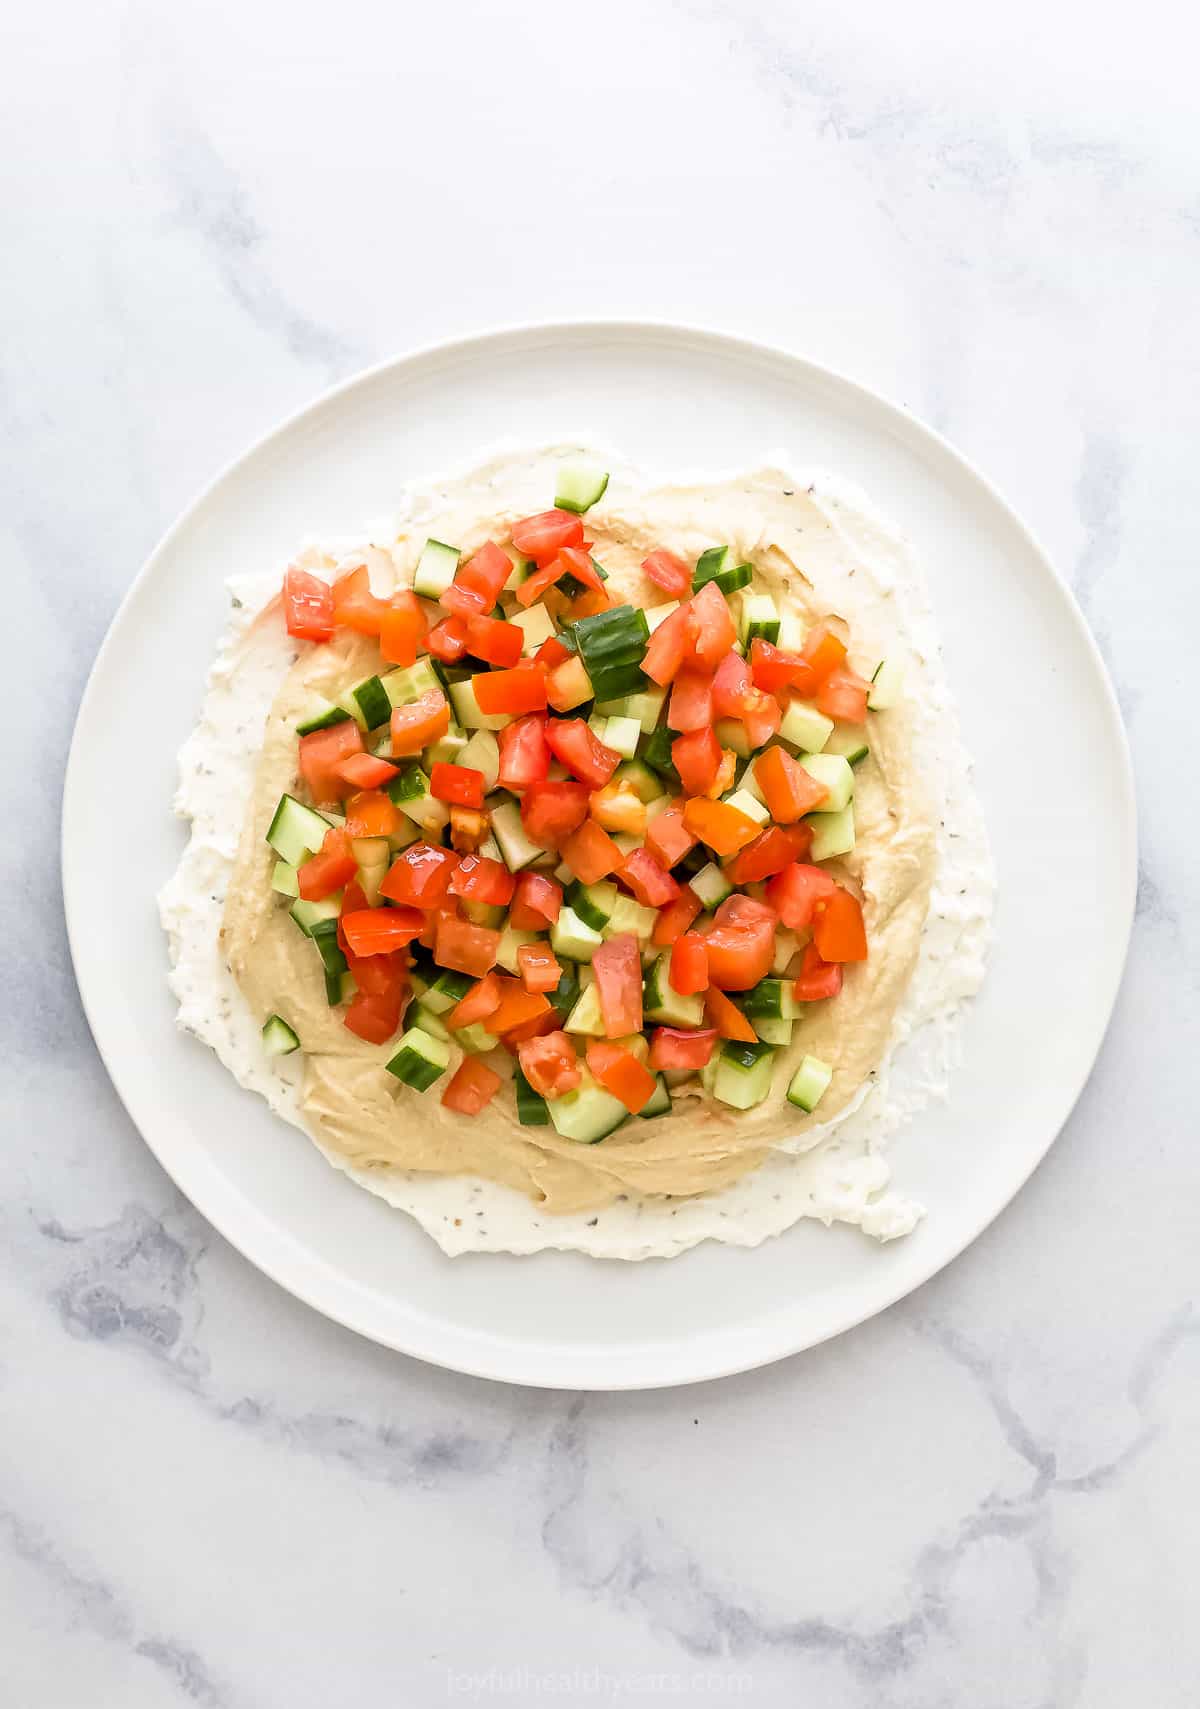 Chopped tomatoes layered on top of the diced cucumbers, hummus and whipped feta